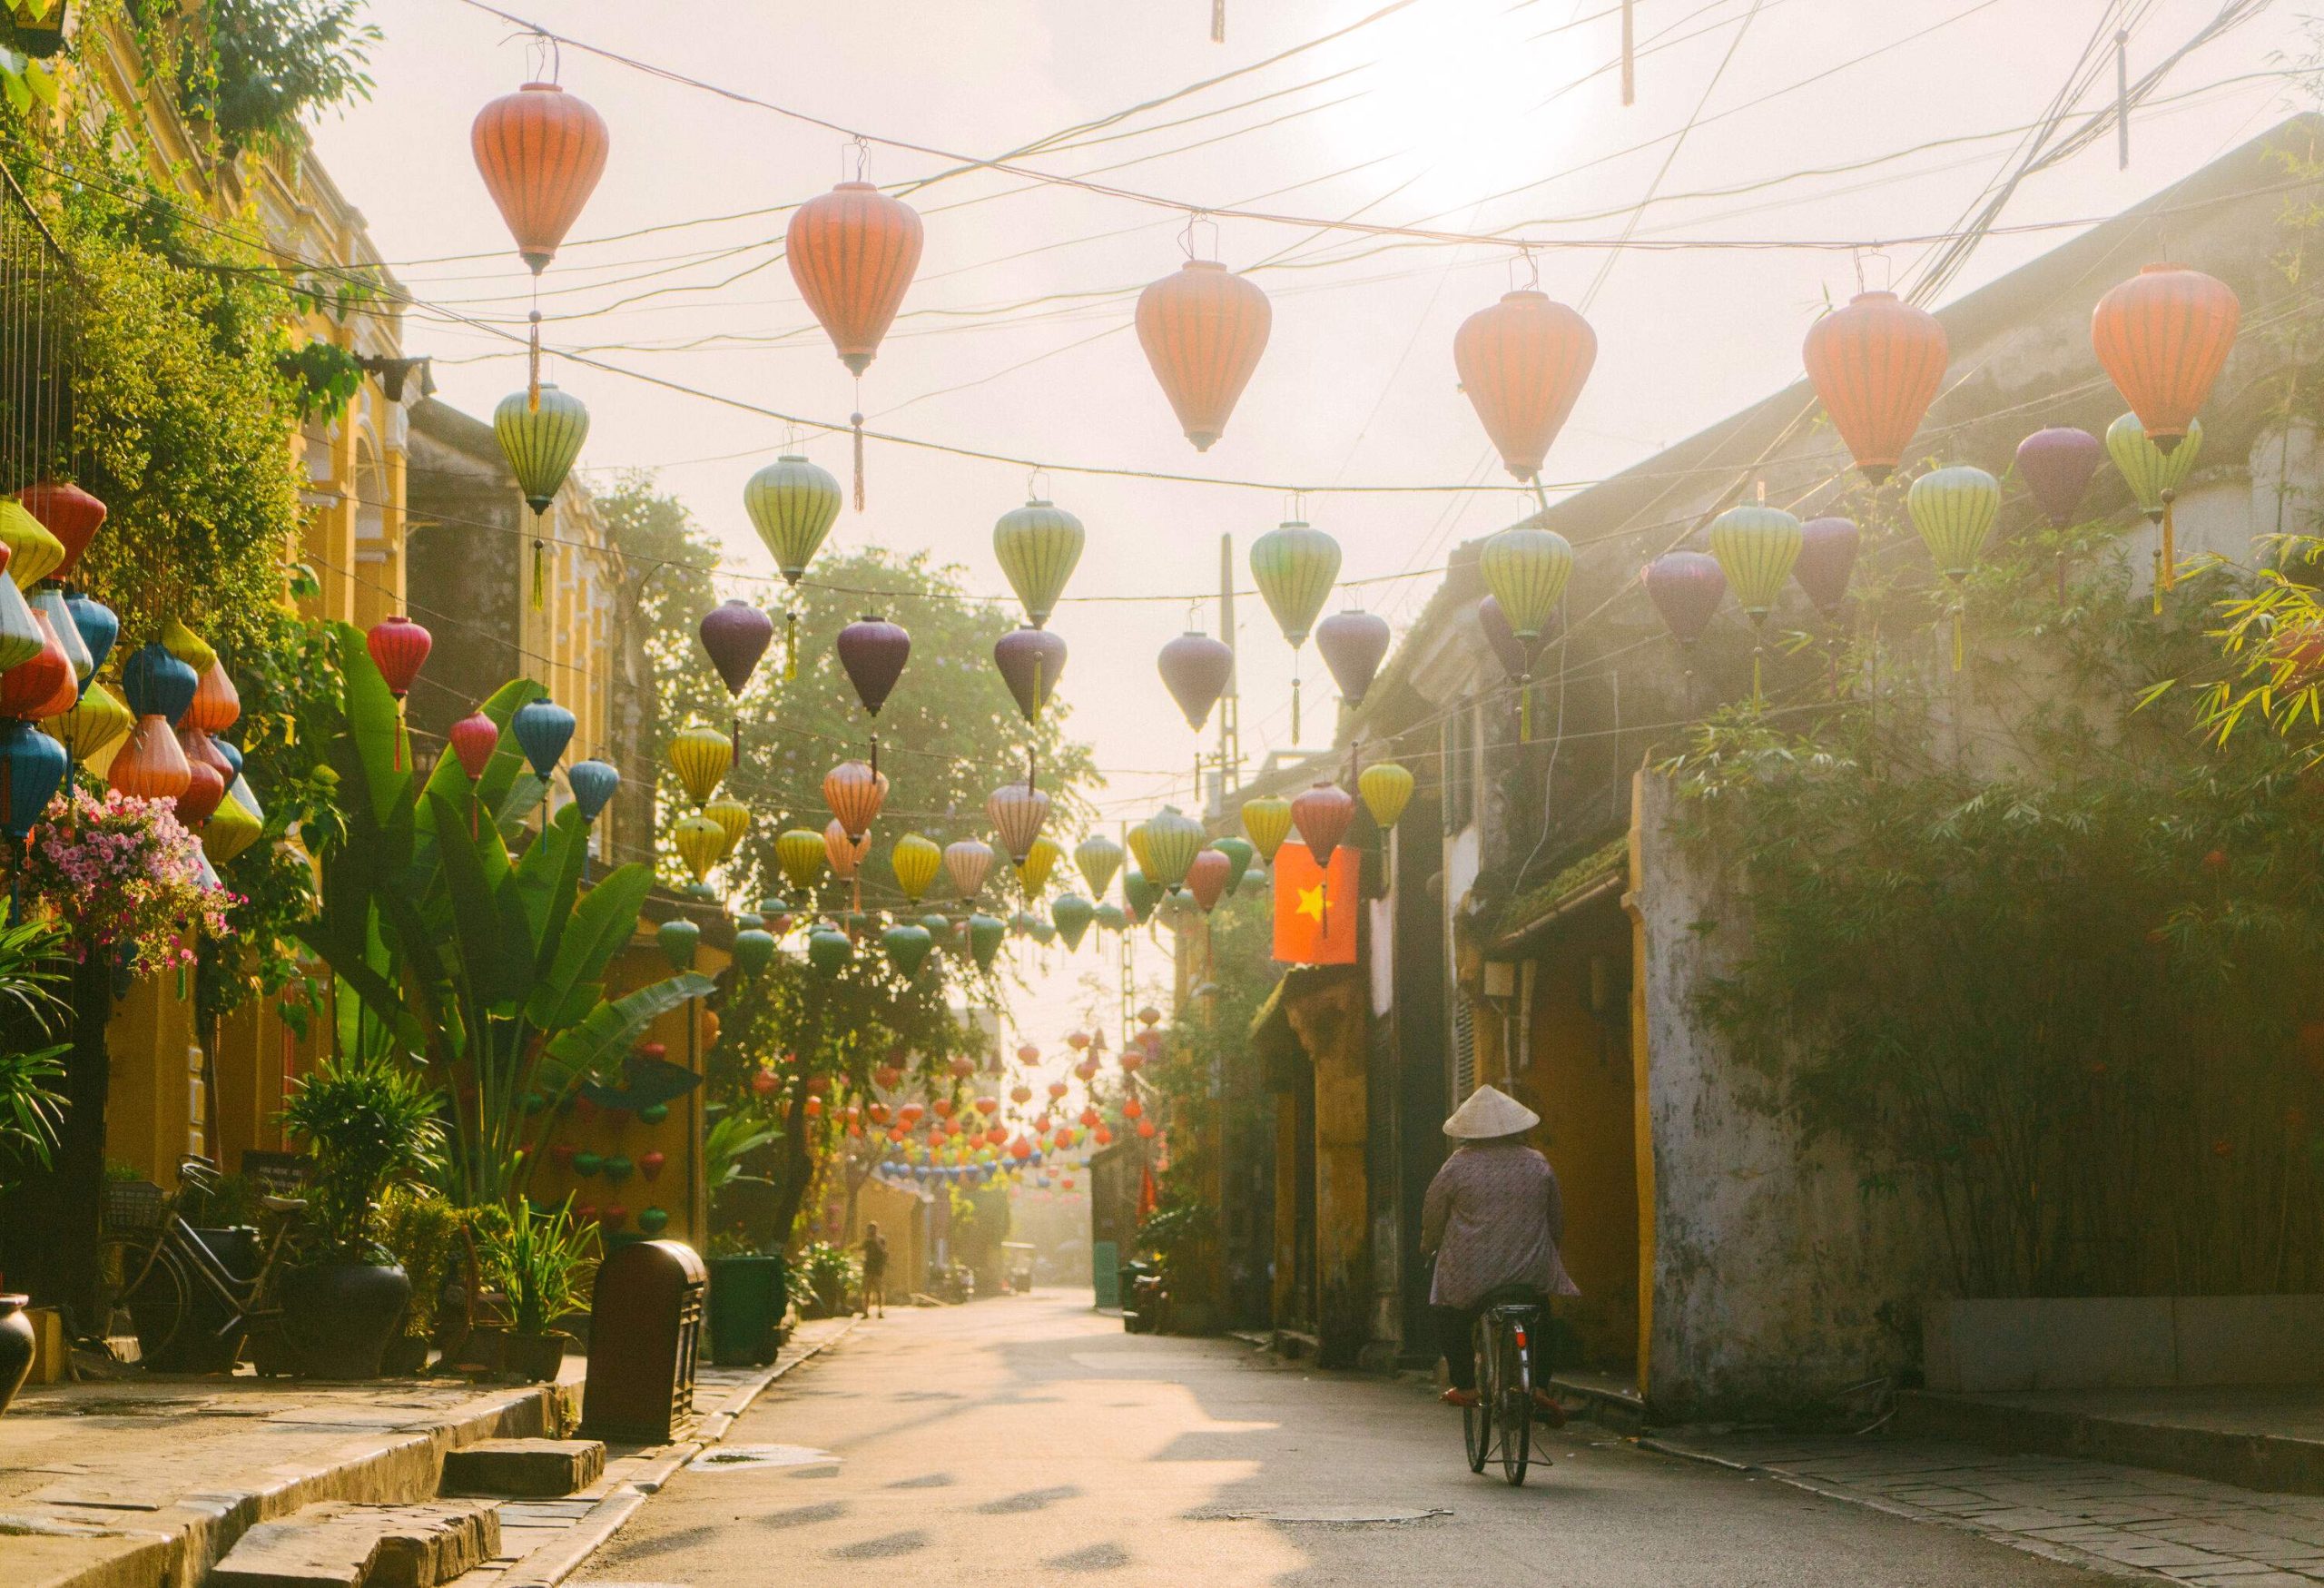 An individual on a bicycle along a paved street, surrounded by charming classic houses adorned with hanging lanterns.